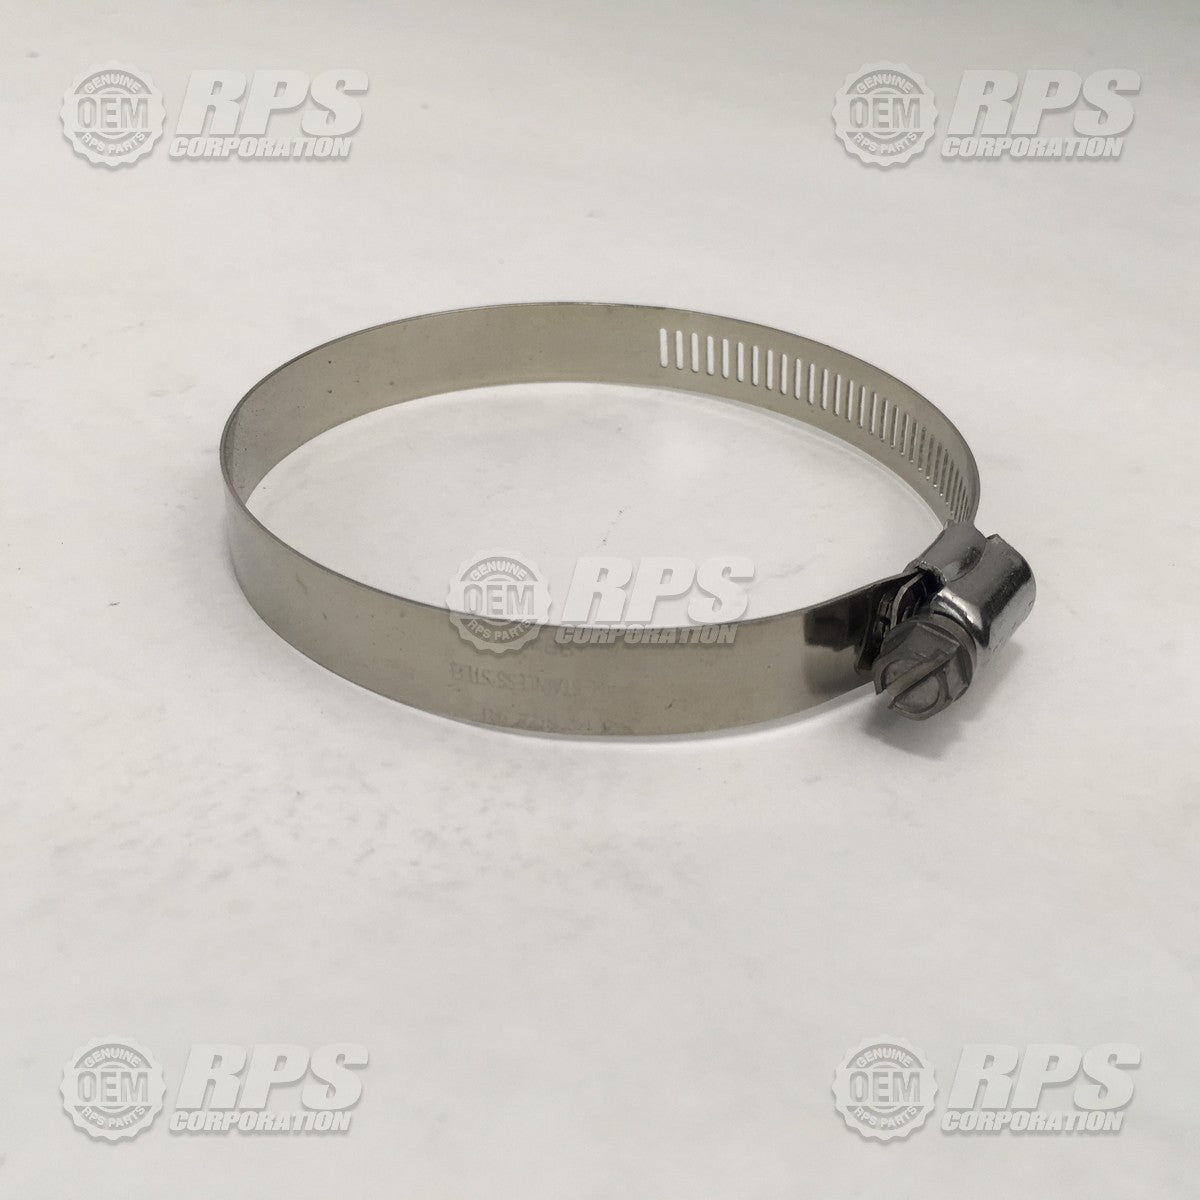 FactoryCat/Tomcat H-0427619, Clamp,Hose,2-1/2" to 3-1/2" Stainless